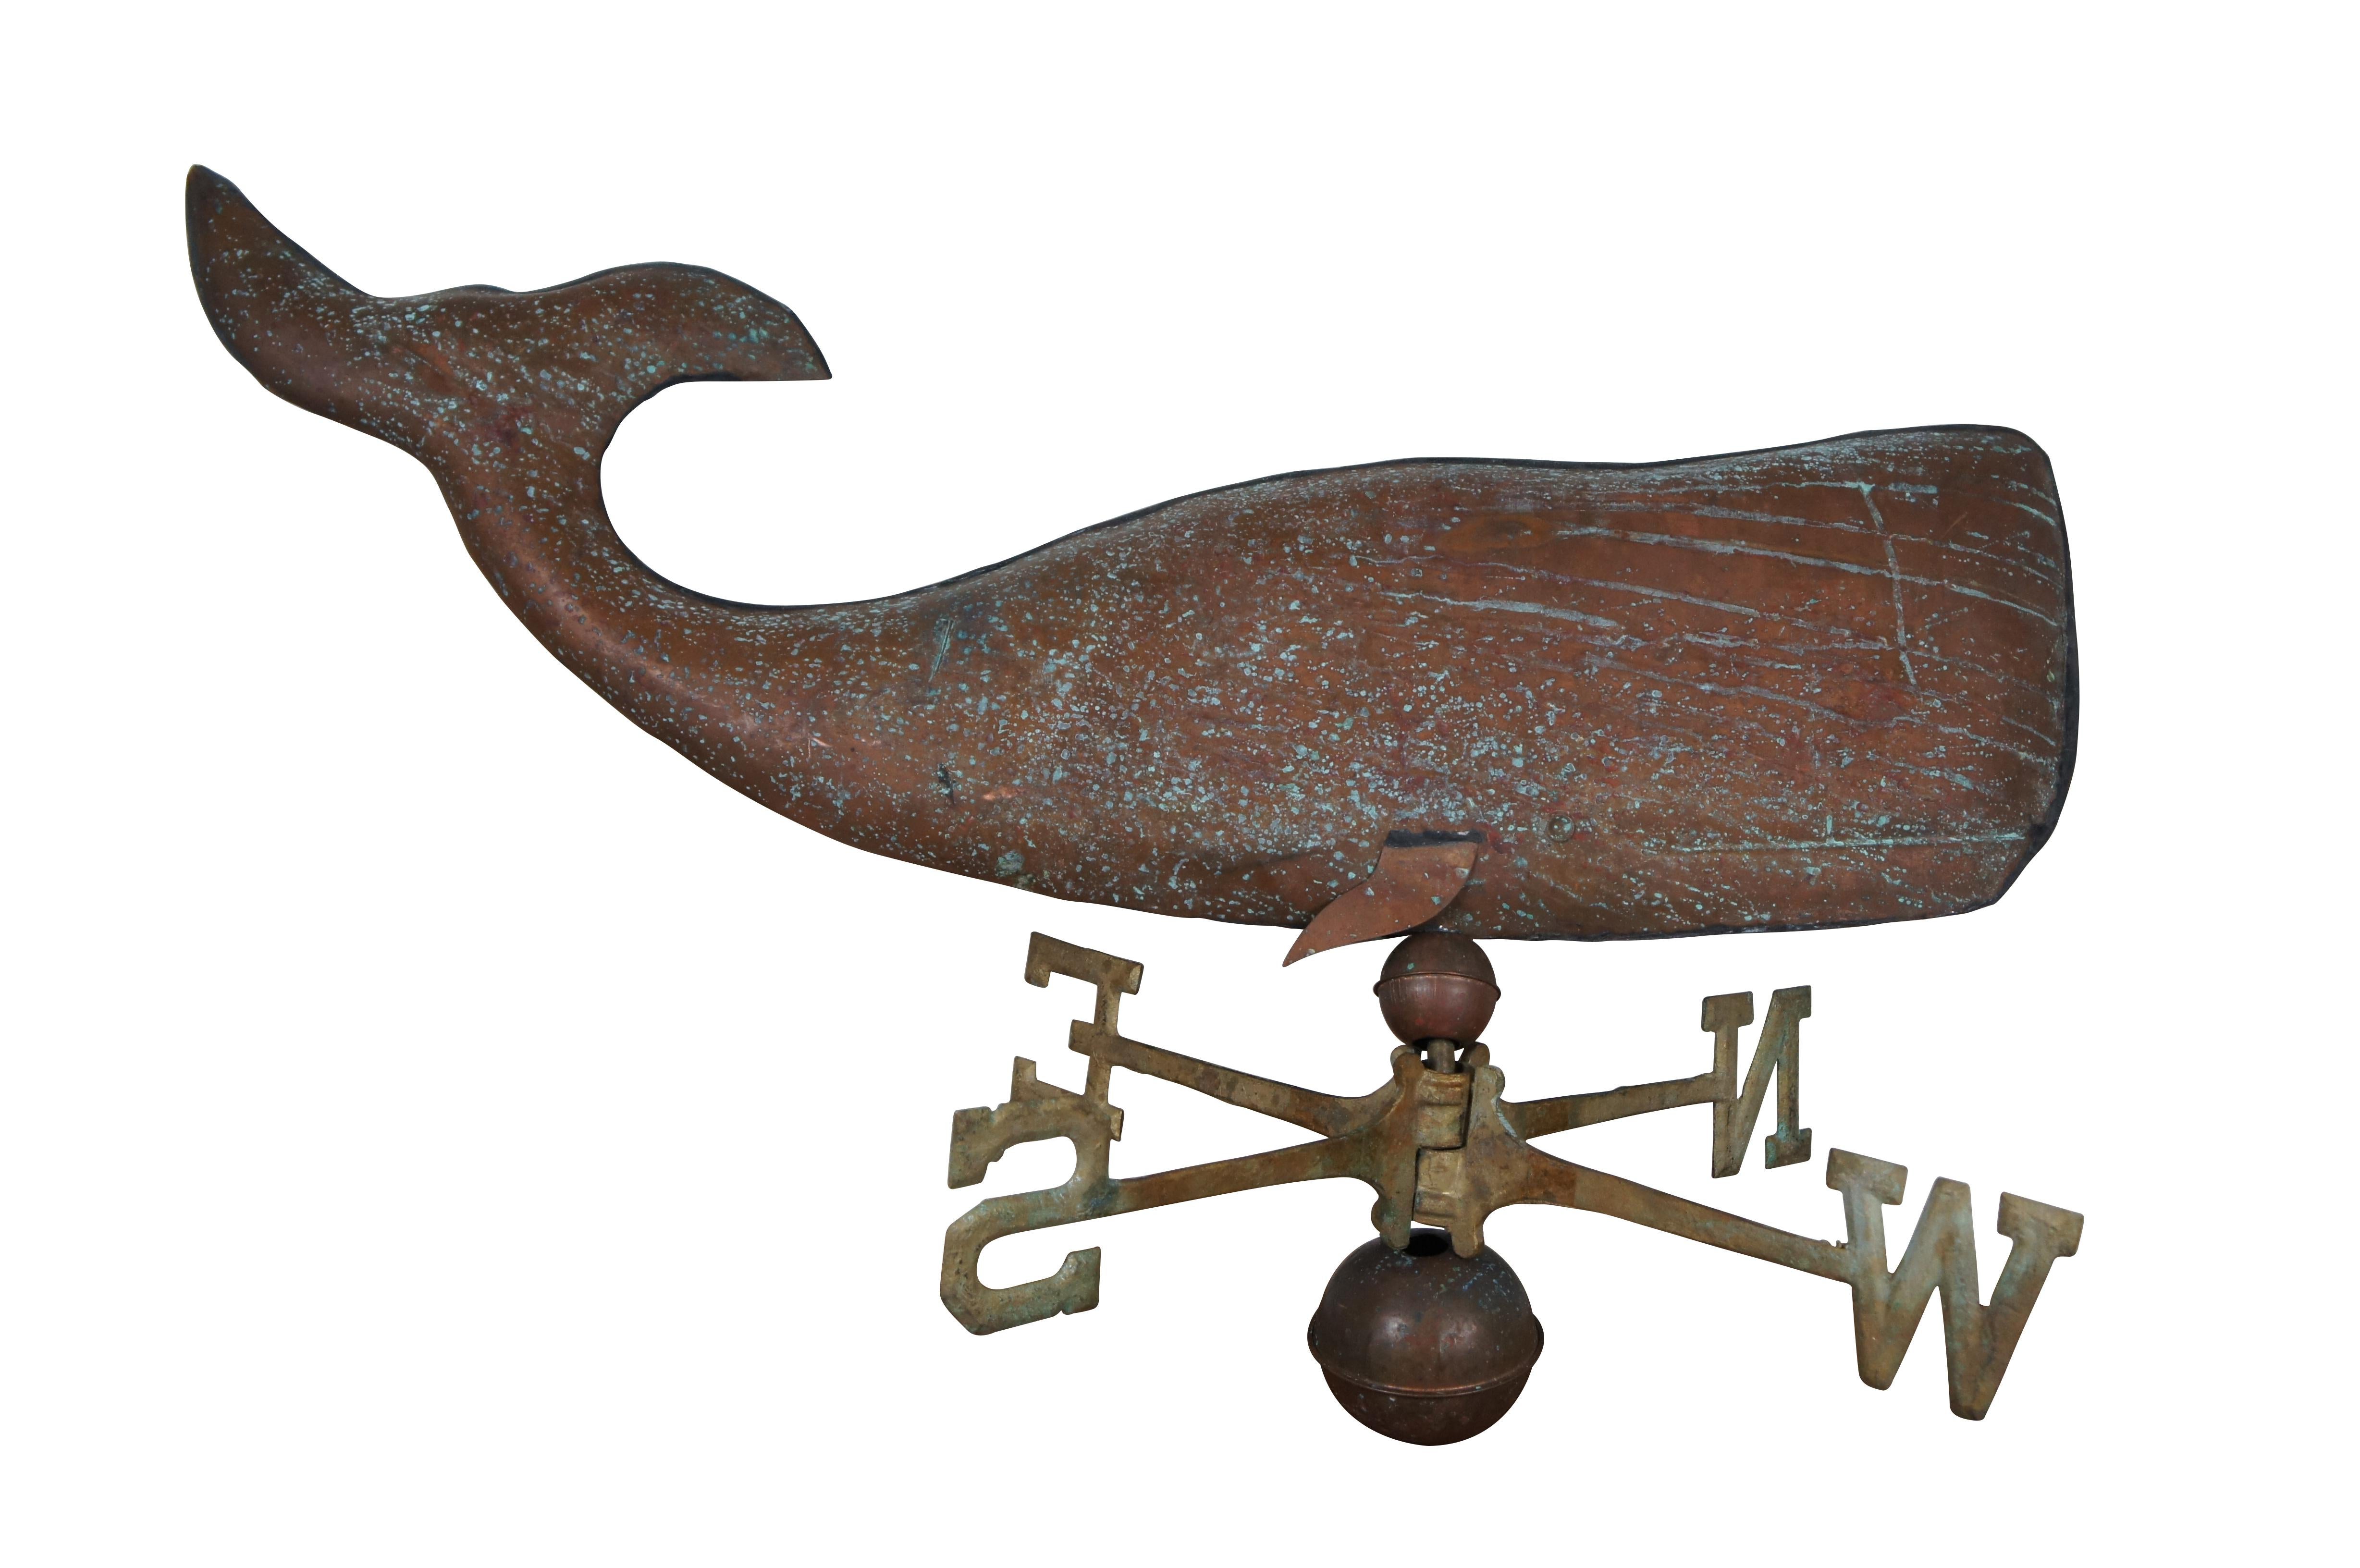 Vintage 1979 iron and copper wind / weather vane by Sign of the Crab. Features traditional cardinal directions in gilded iron, framed by a pair of graduated copper balls and topped with a hollow copper sperm whale. Includes instructions and brass